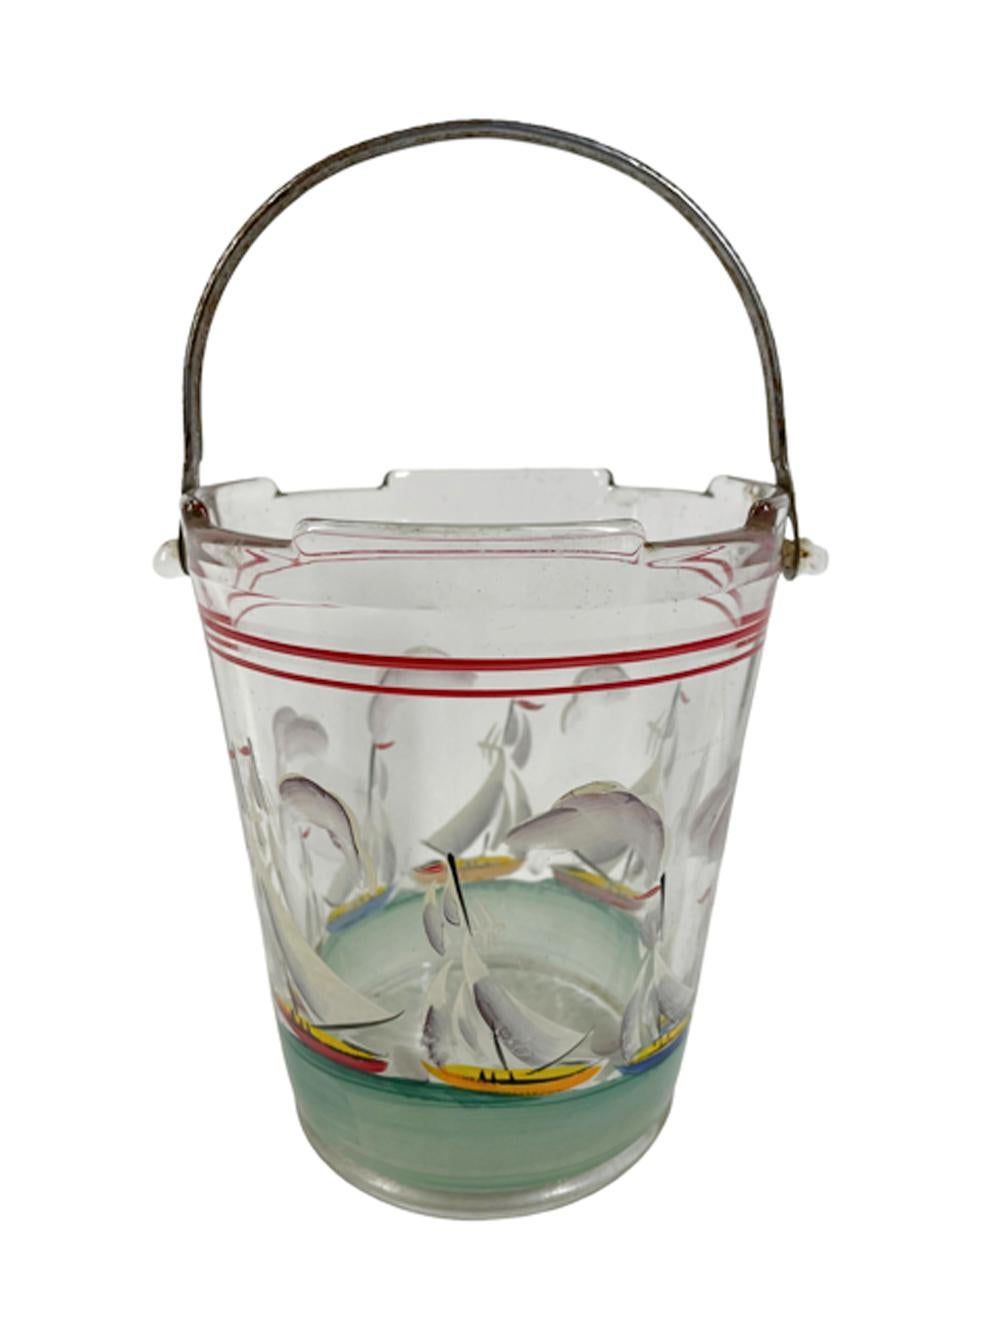 Art Deco clear glass ice bucket of pail form with a shaped rim and sunburst molded base and hammered metal swing handle hand painted with clouds above a variety of sailboats on a green sea.